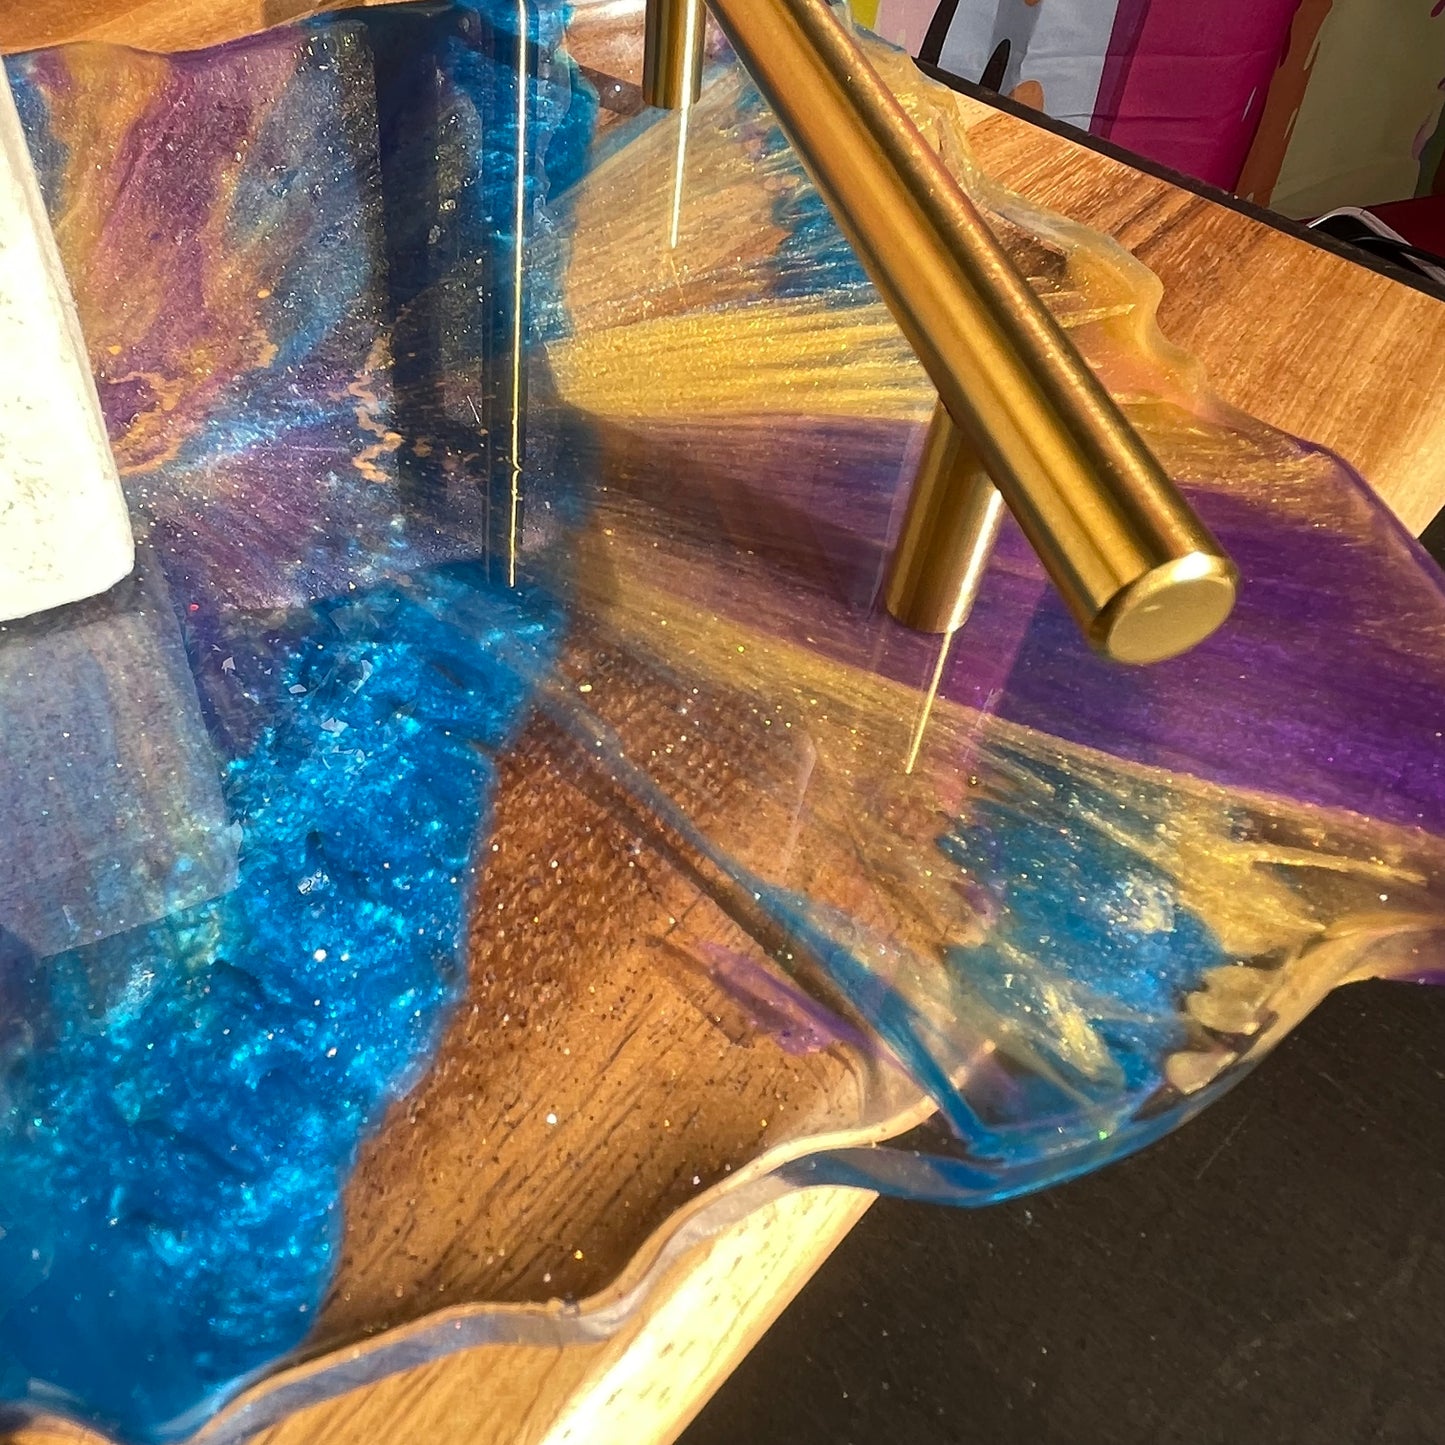 Geode tray Class - Wednesday 3/20 @ 6pm